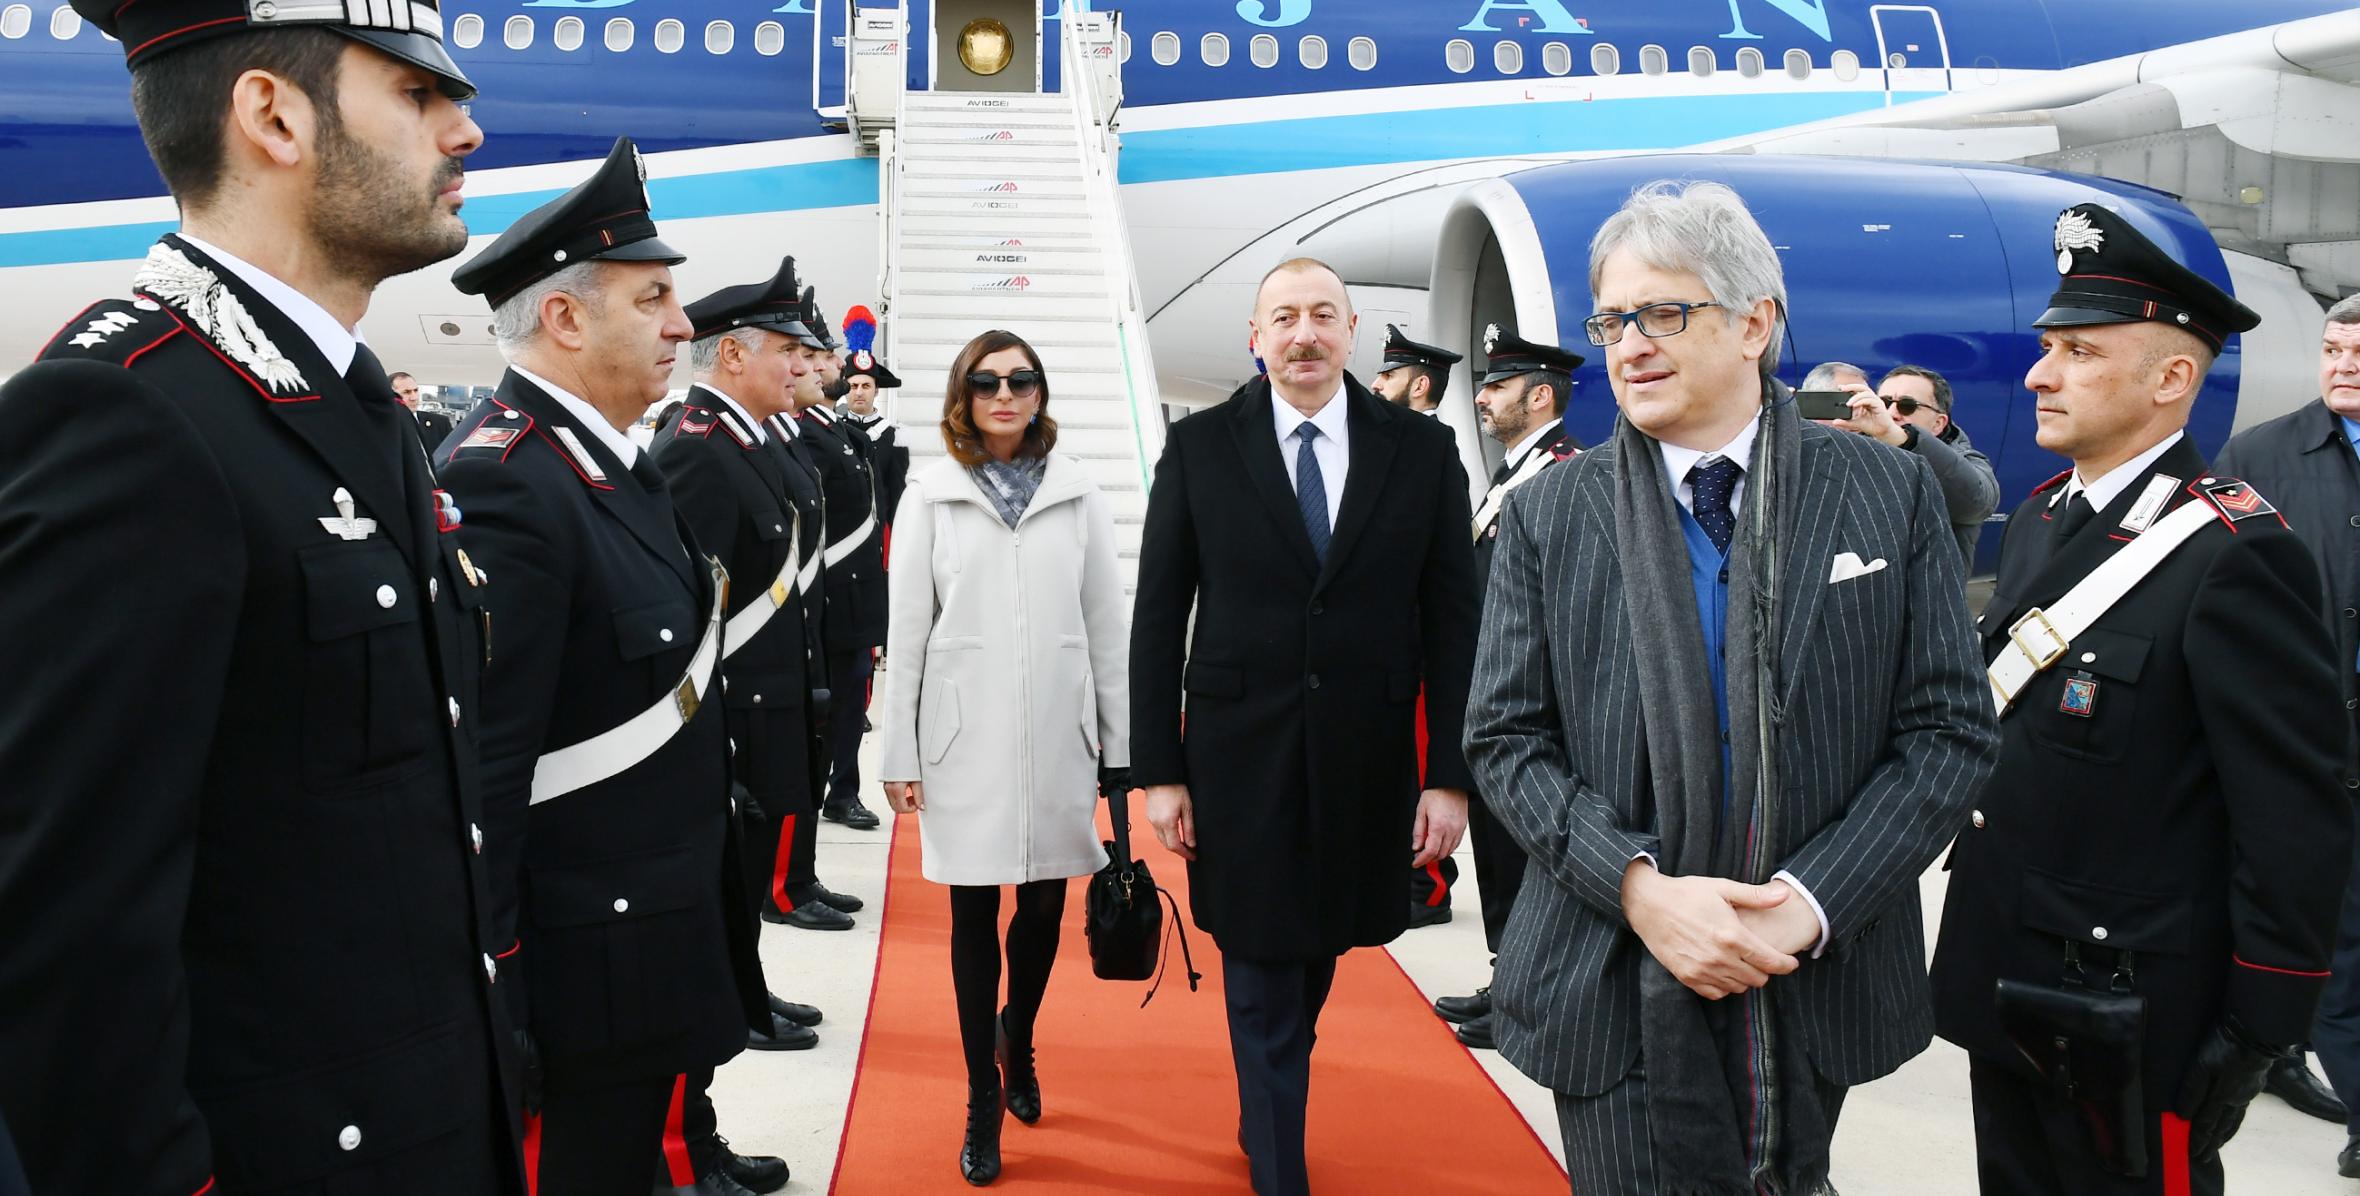 Ilham Aliyev arrived in Italy for state visit